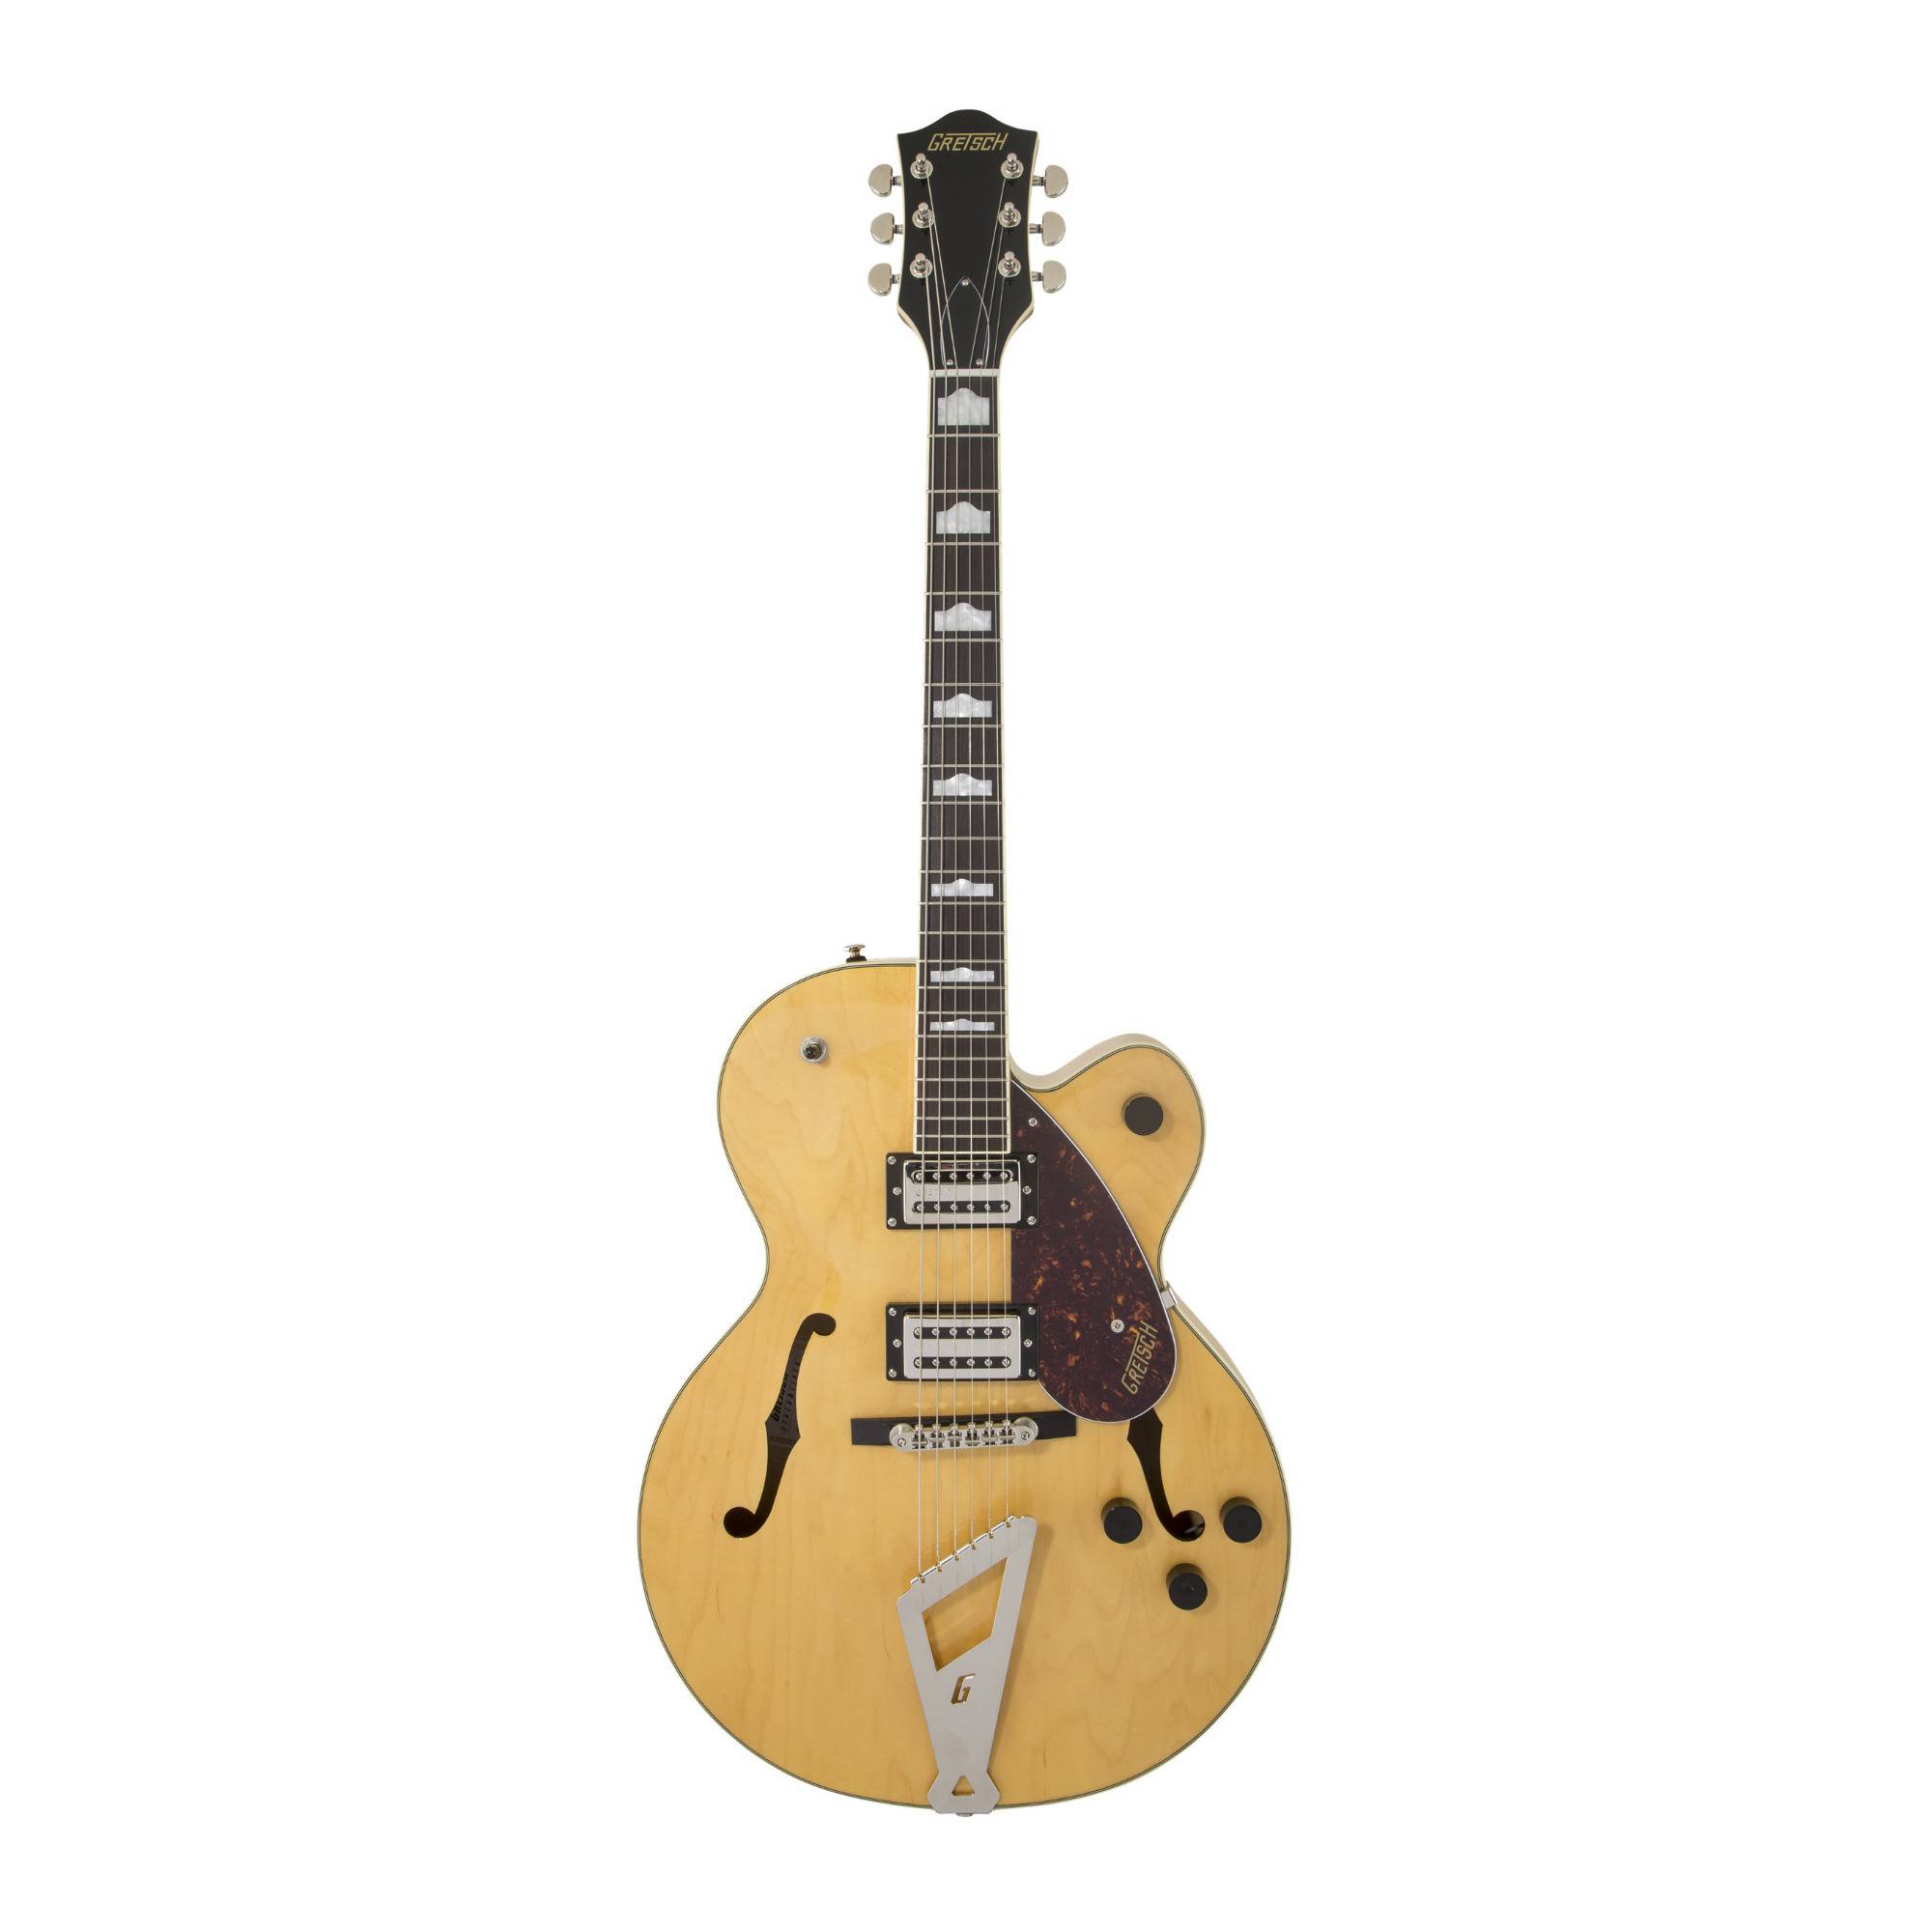 Gretsch G2420 Streamliner Hollow Body 6-String Electric Guitar (Right-Handed, Village Amber)